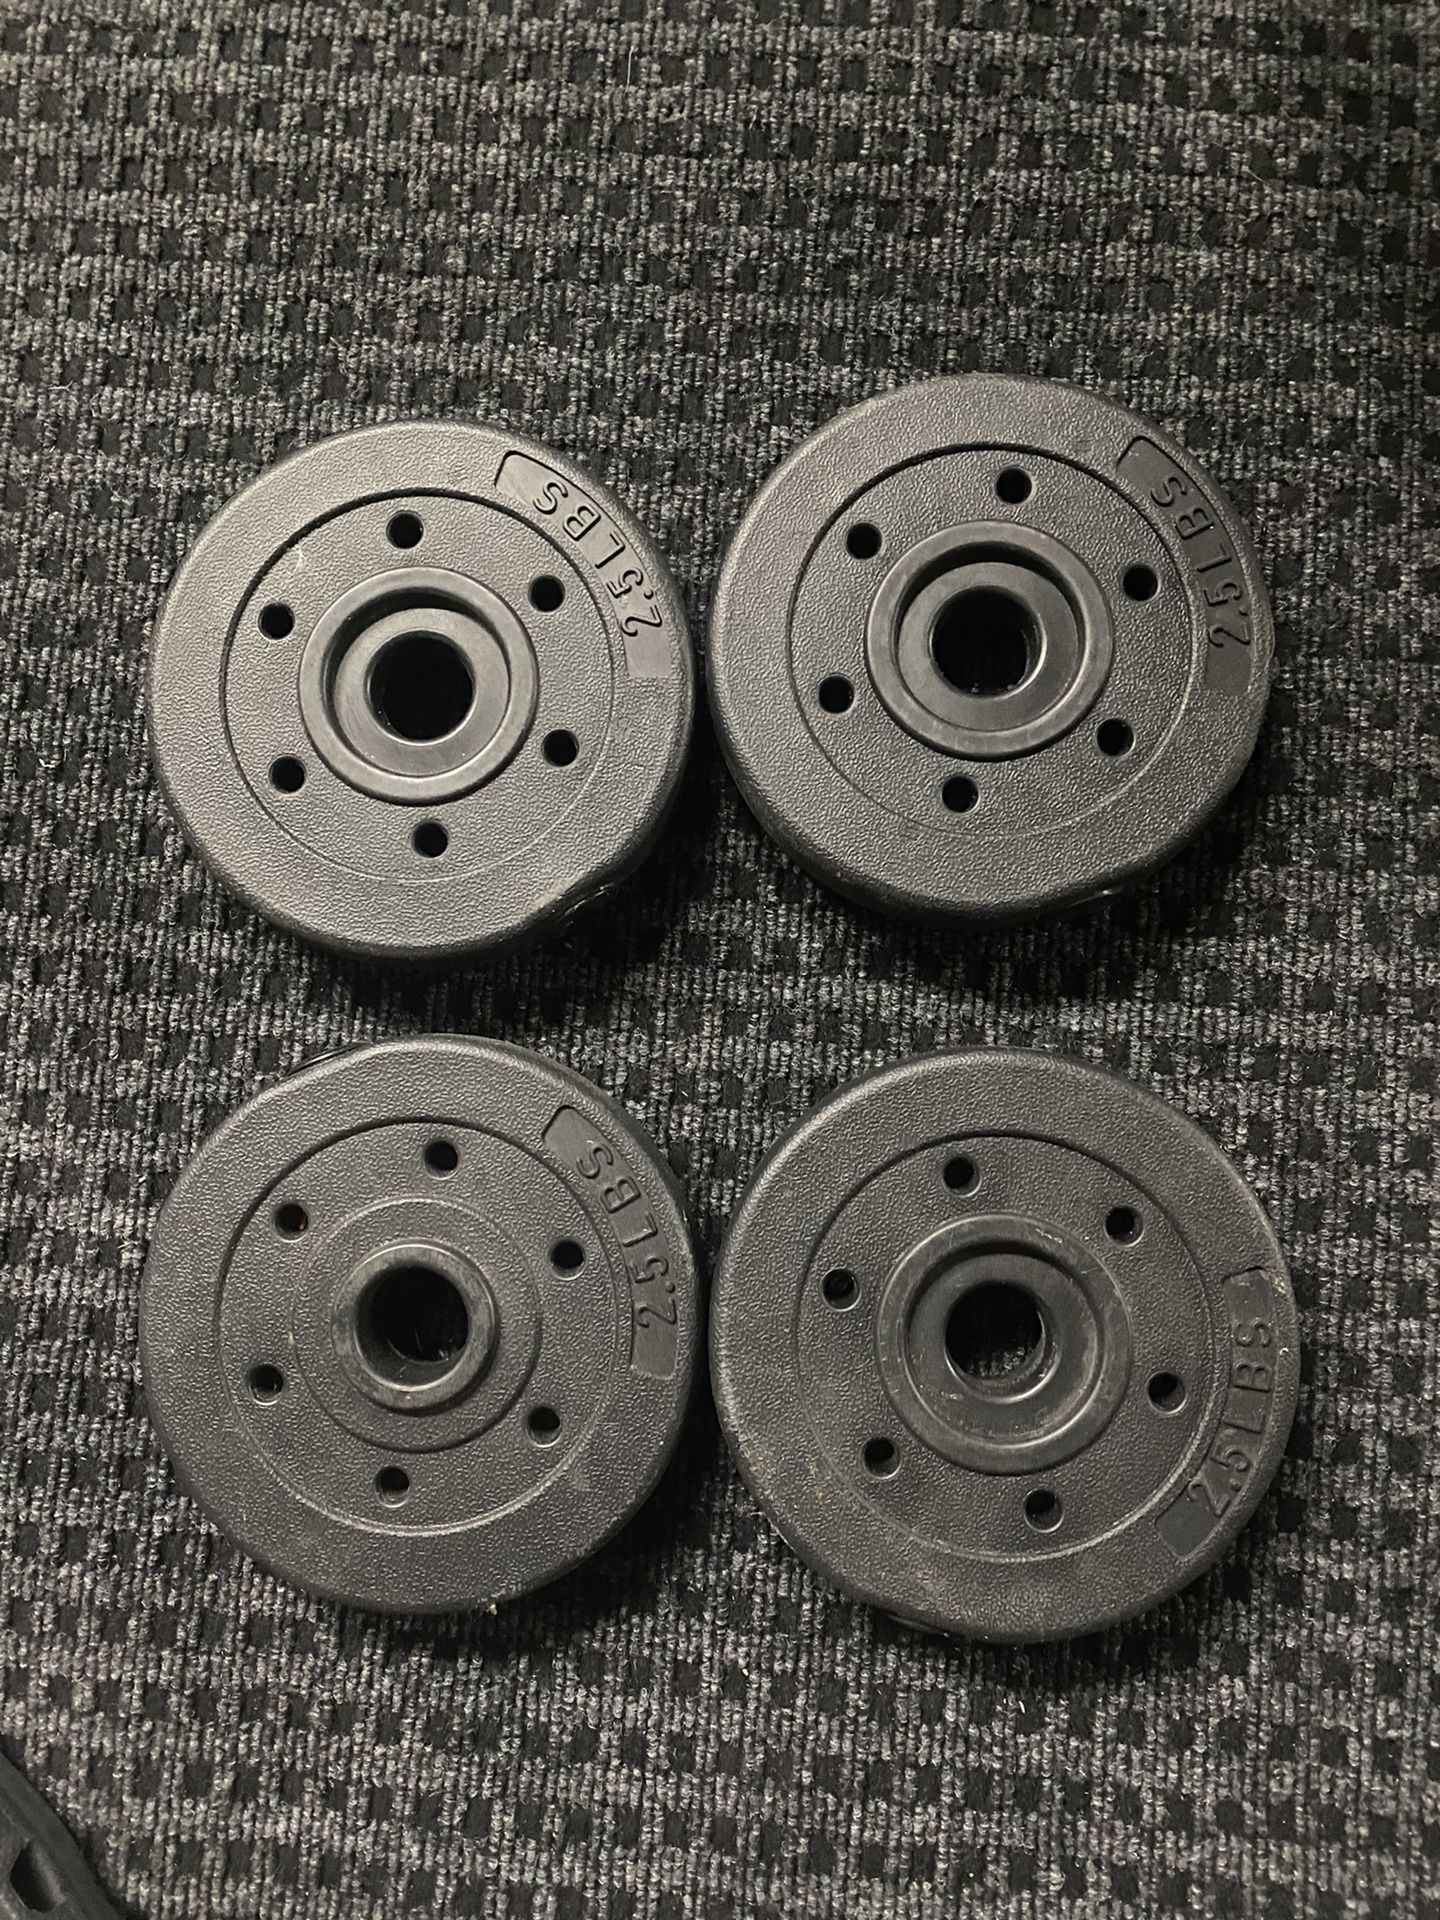 Weight plates for standard 1inch bar